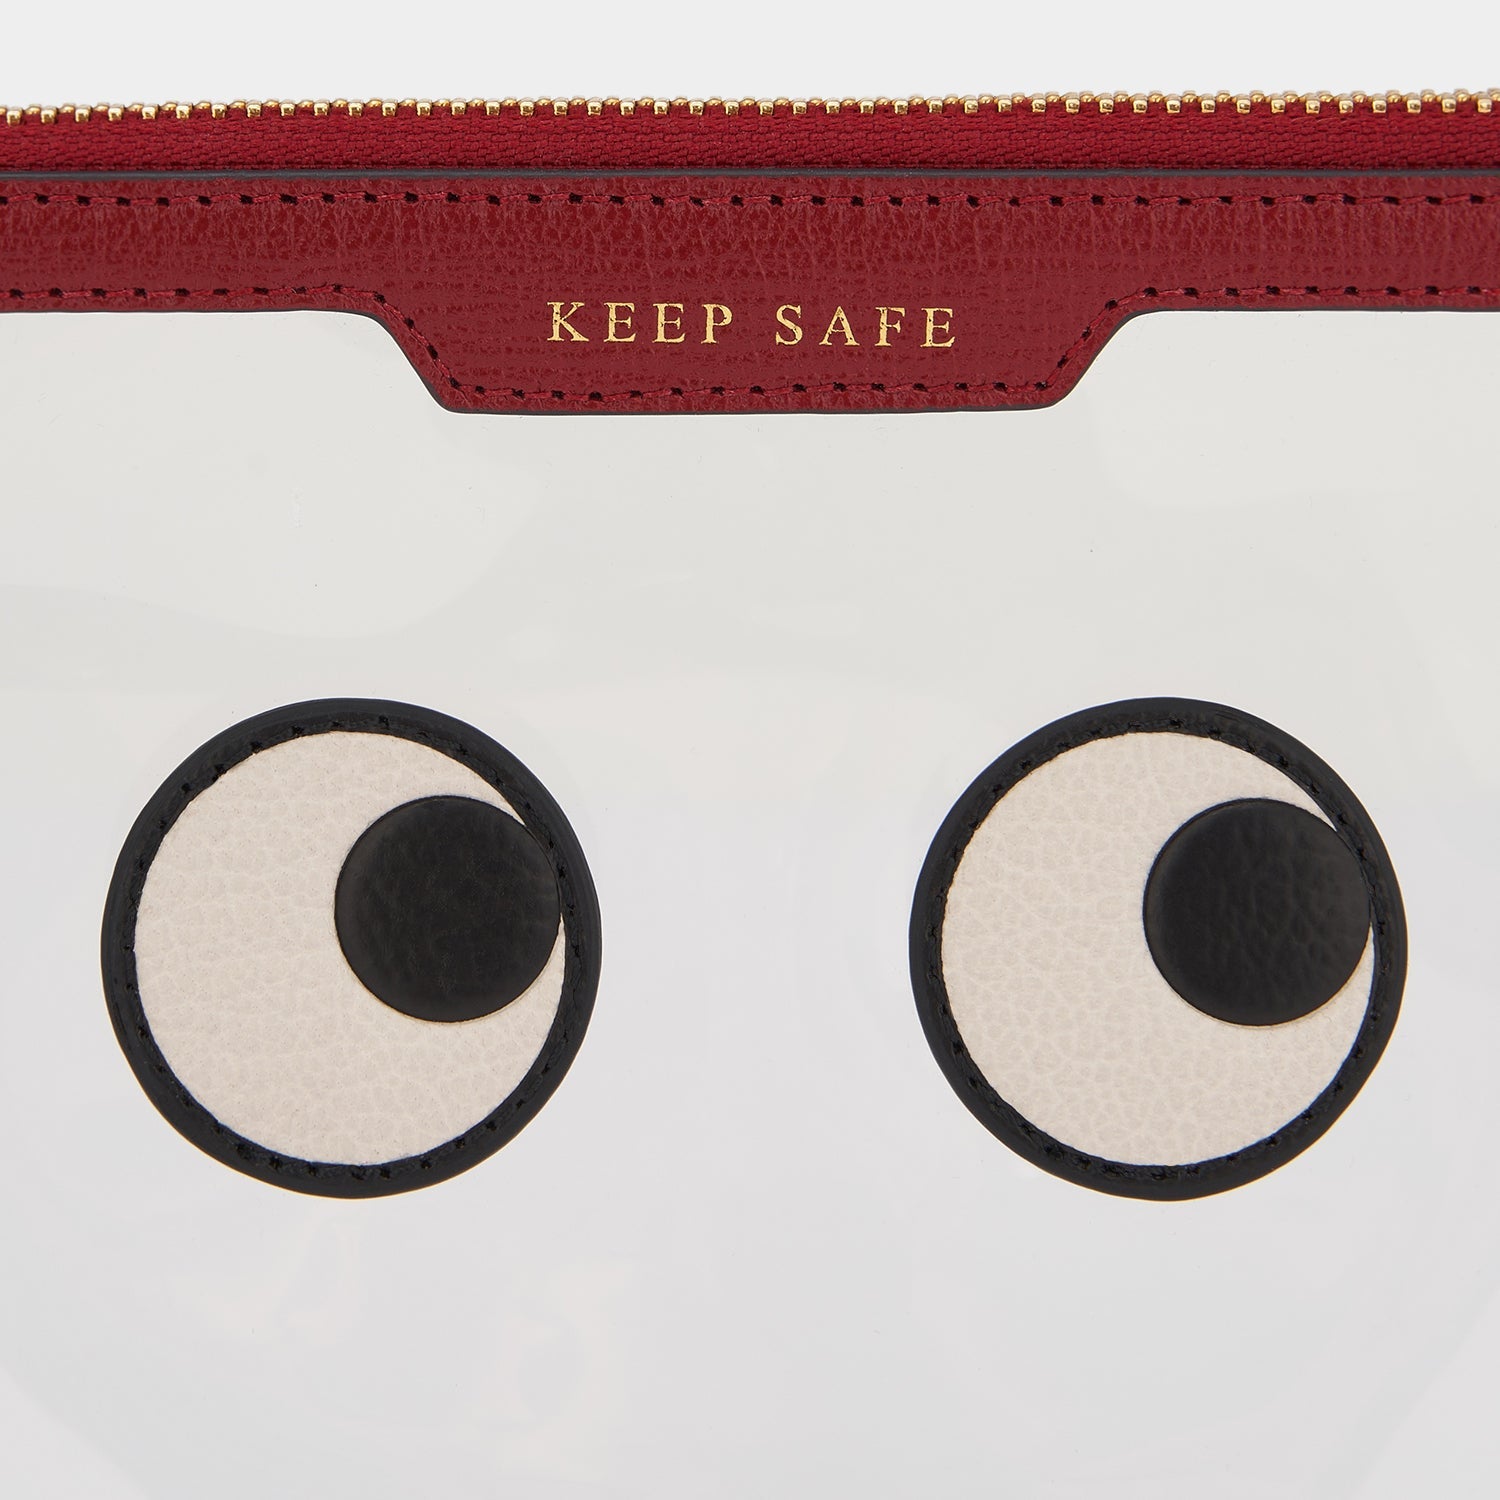 Eyes Keep Safe Pouch -

                  
                    Capra Leather in Vampire Red -
                  

                  Anya Hindmarch EU
